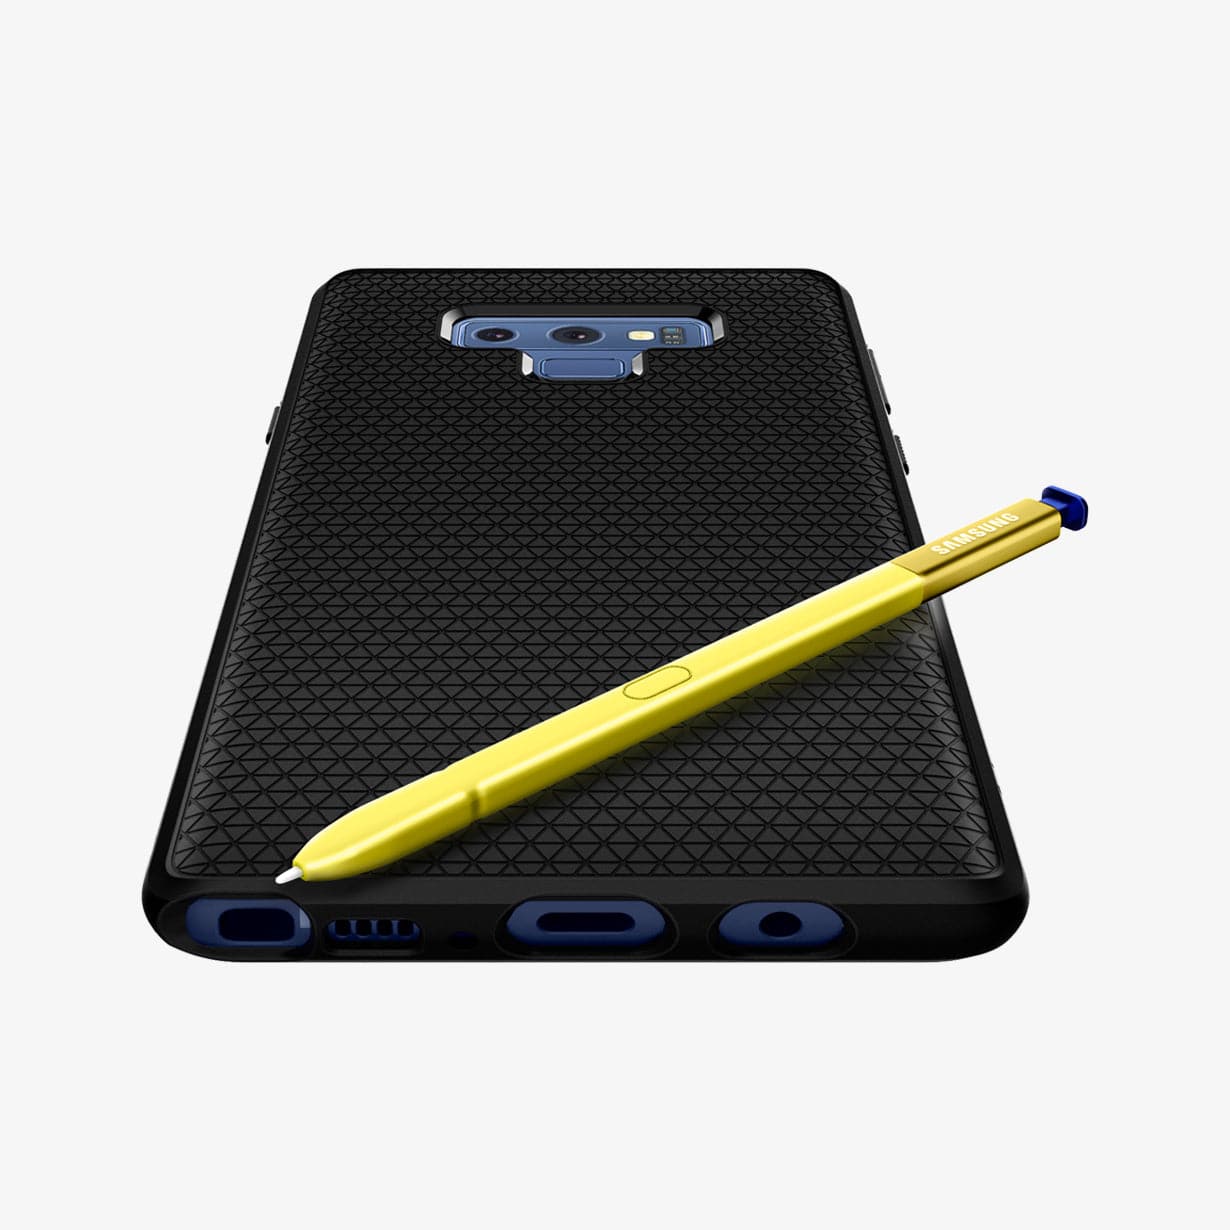 599CS24580 - Galaxy Note 9 Liquid Air Case in black showing the back and bottom with s pen on device